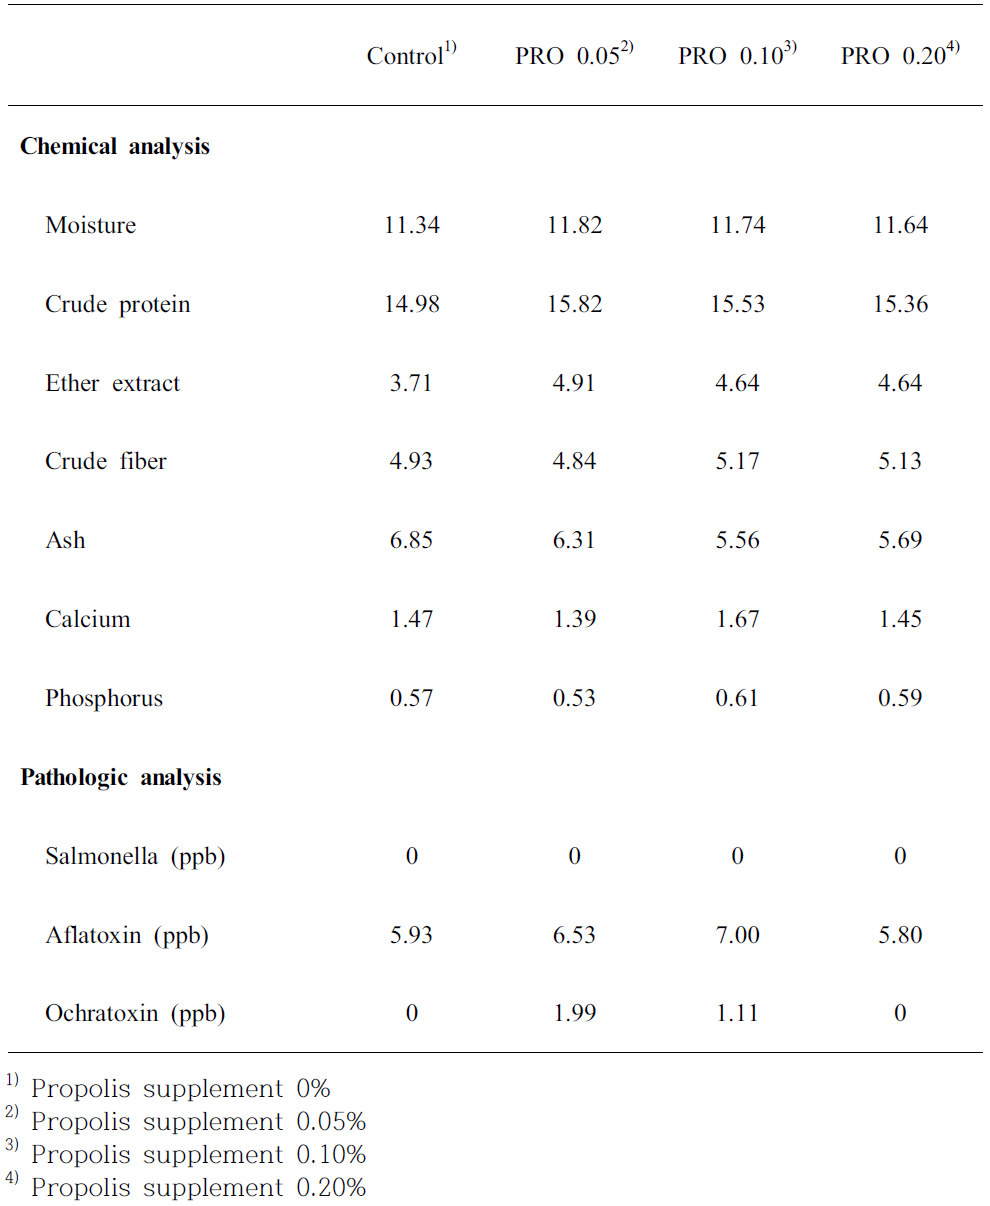 Effect of propolis supplementation on chemical analysis in low temperature pellet (Poultry)